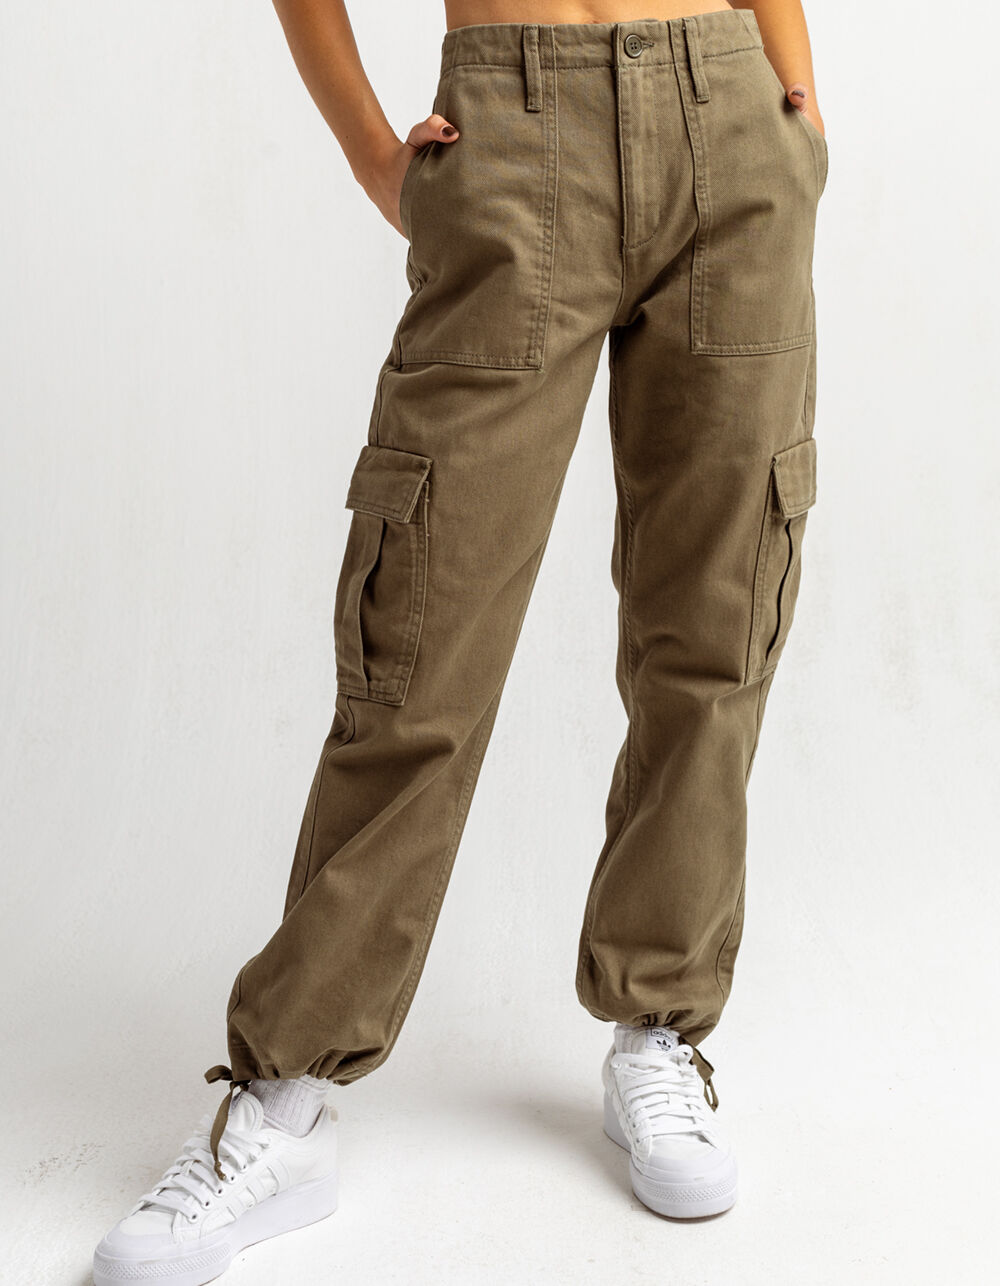 BDG Urban Outfitters Authentic Womens Cargo Pants - KHAKI | Tillys